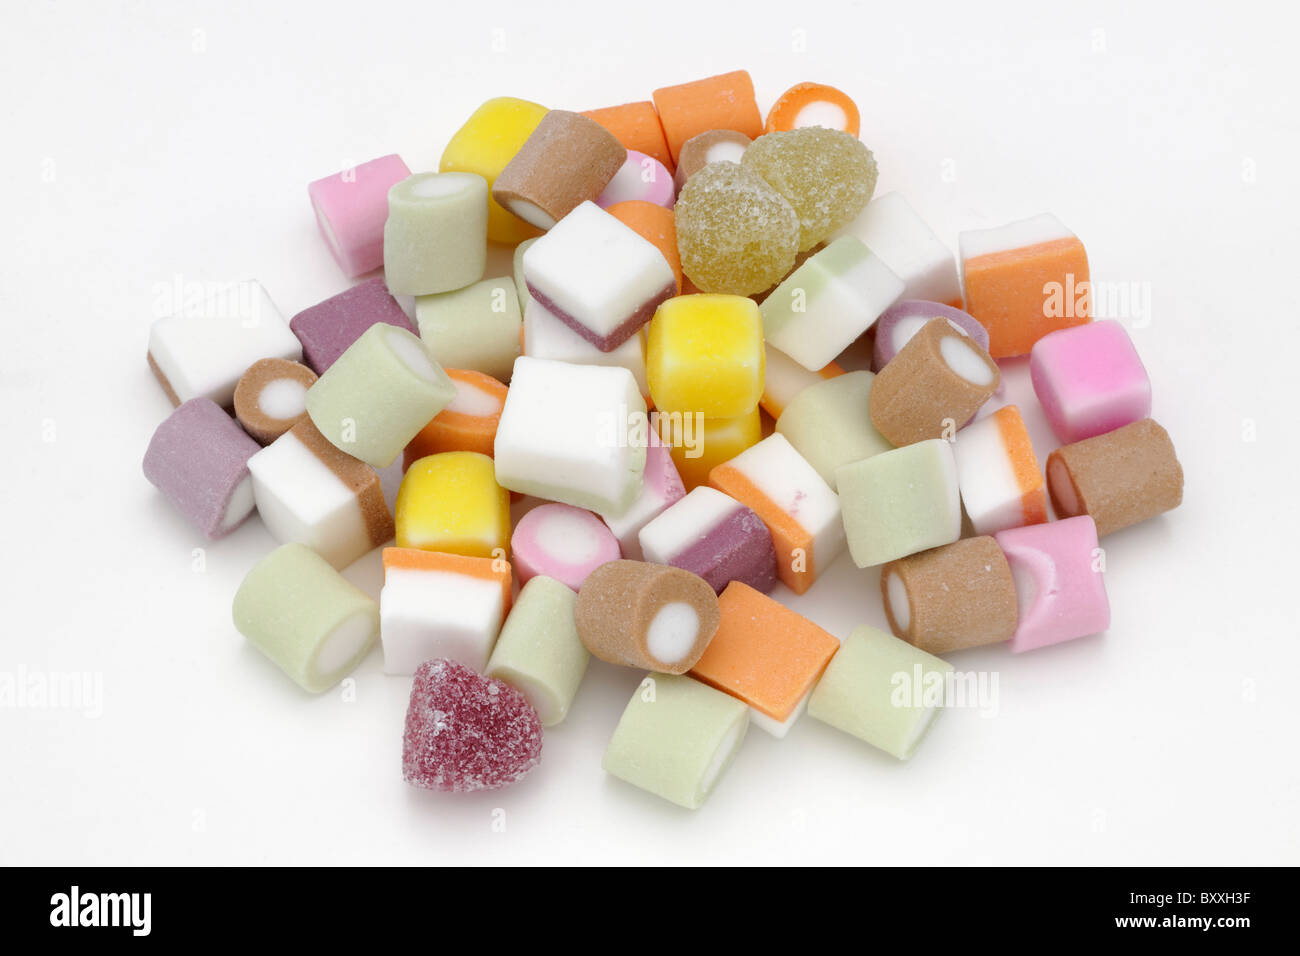 Pile of Dolly mixture sweets Stock Photo